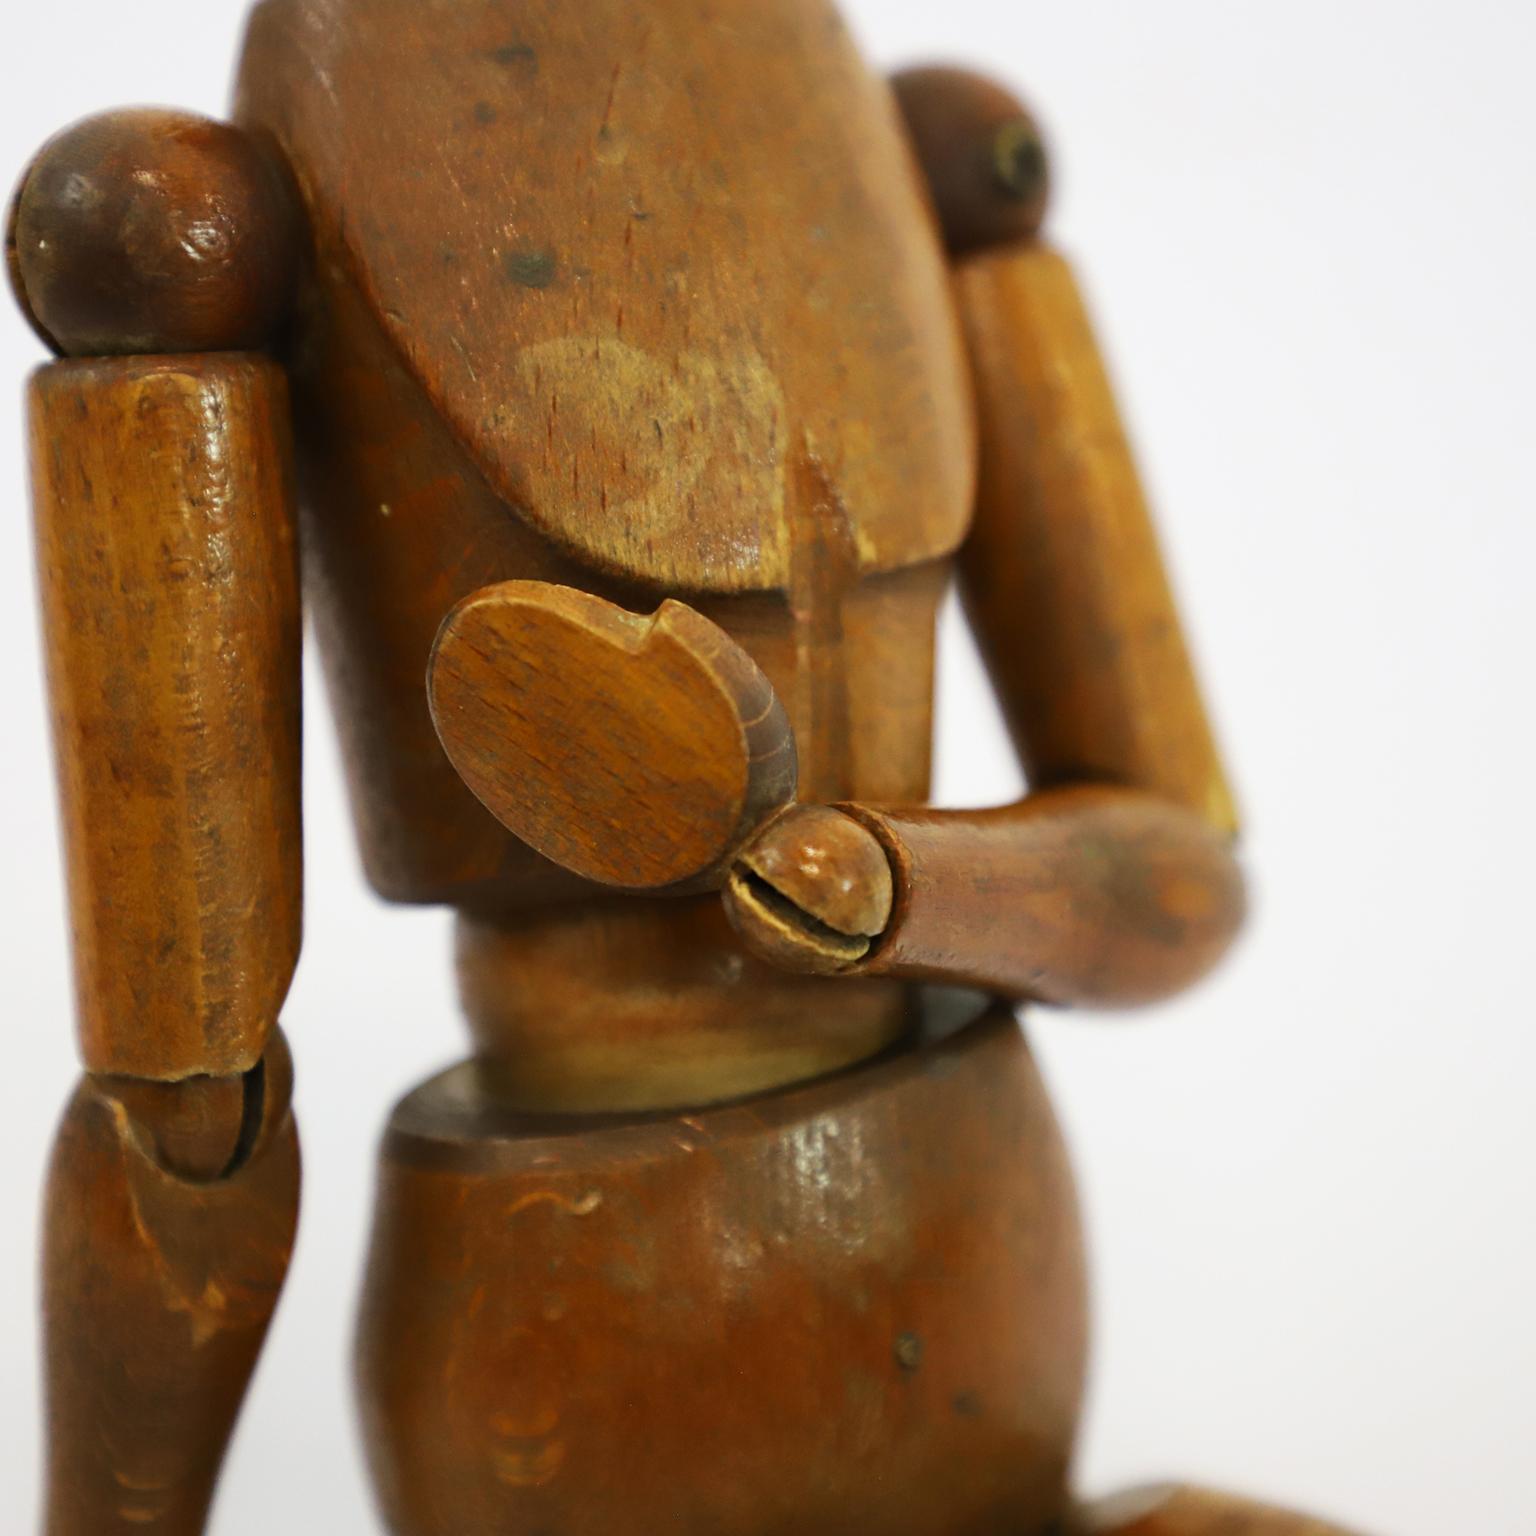 Circa 1940. We offer this Antique Articulate Artist's Mannequin made in oak wood.